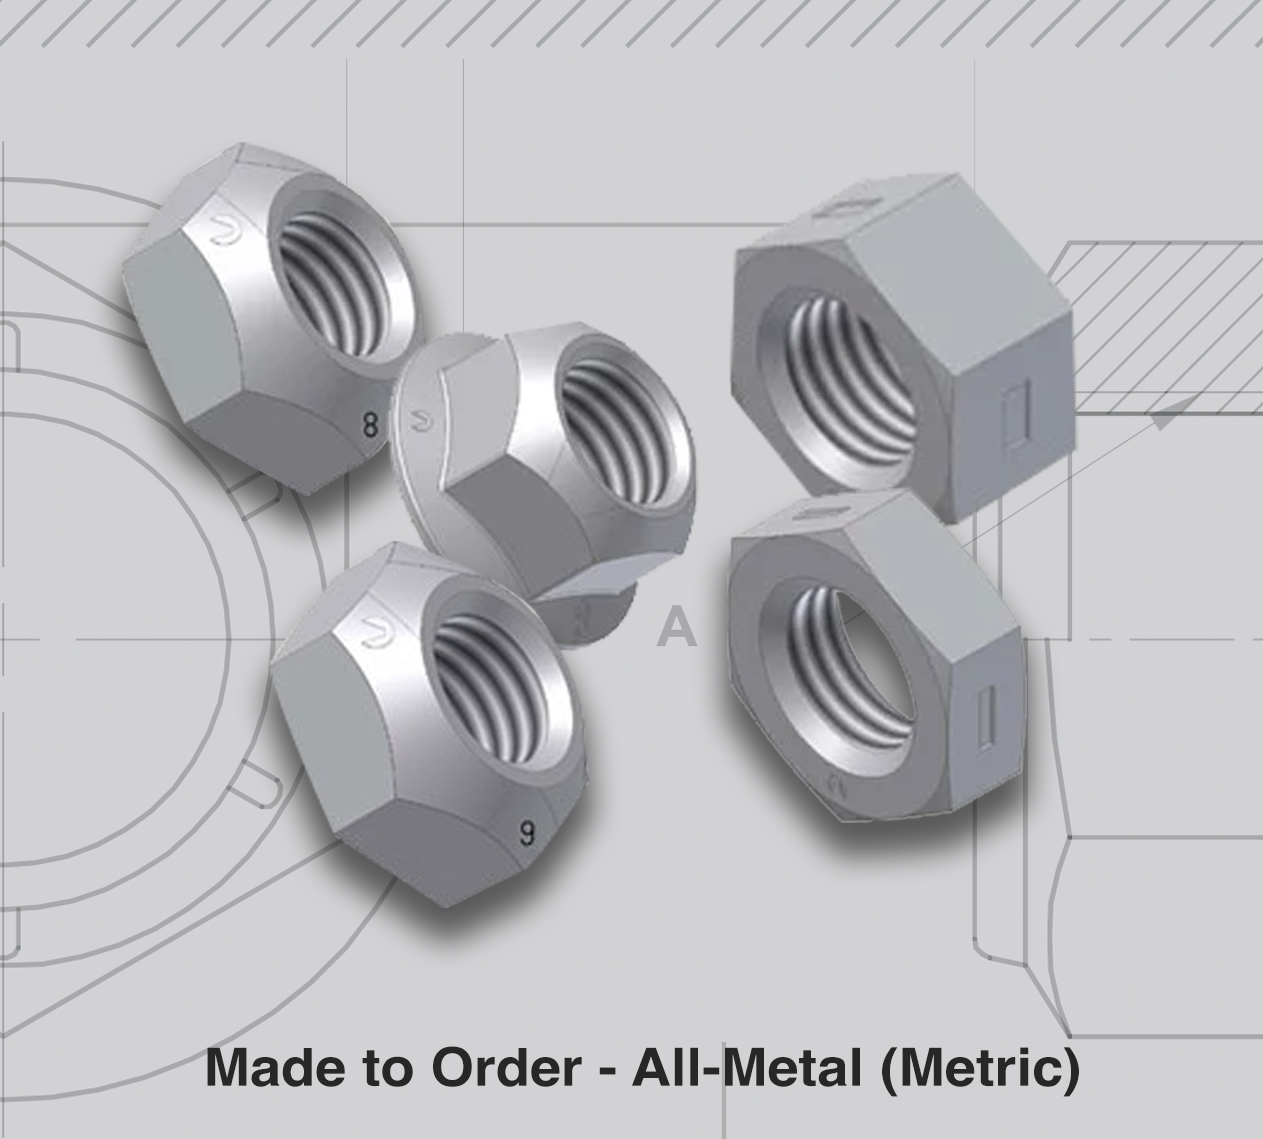 Made to Order - All-Metal (Metric)